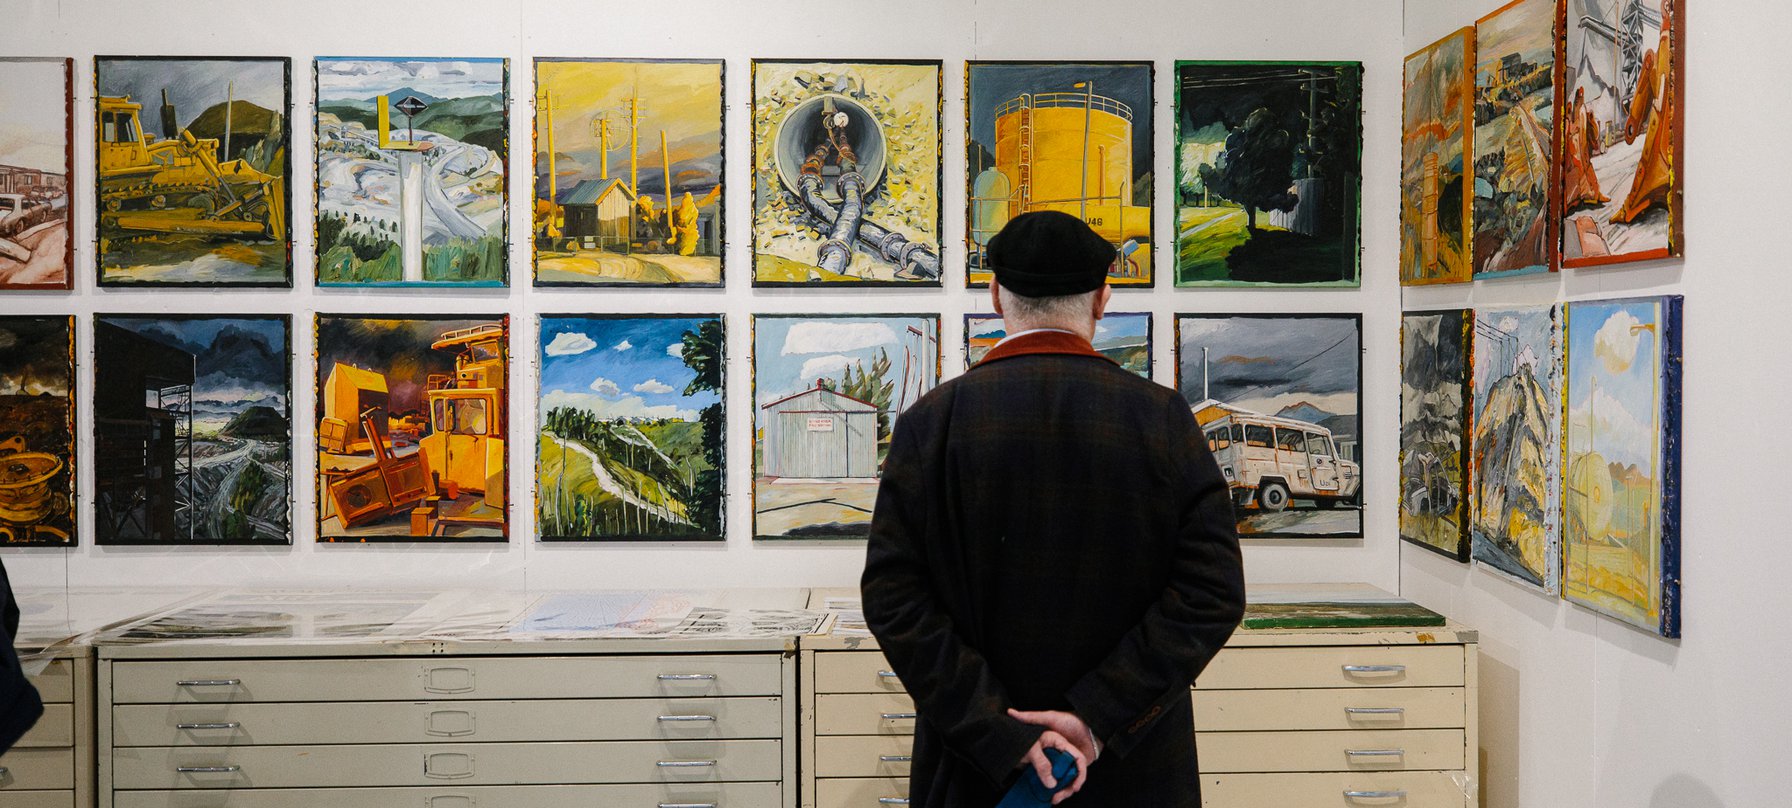 A photo of a man, dressed in black with his hands clasped behind his back, looking at artwork on a wall. The artwork is vibrant painted depictions of industrial landscape scenes. Image by Jesse Hunniford.